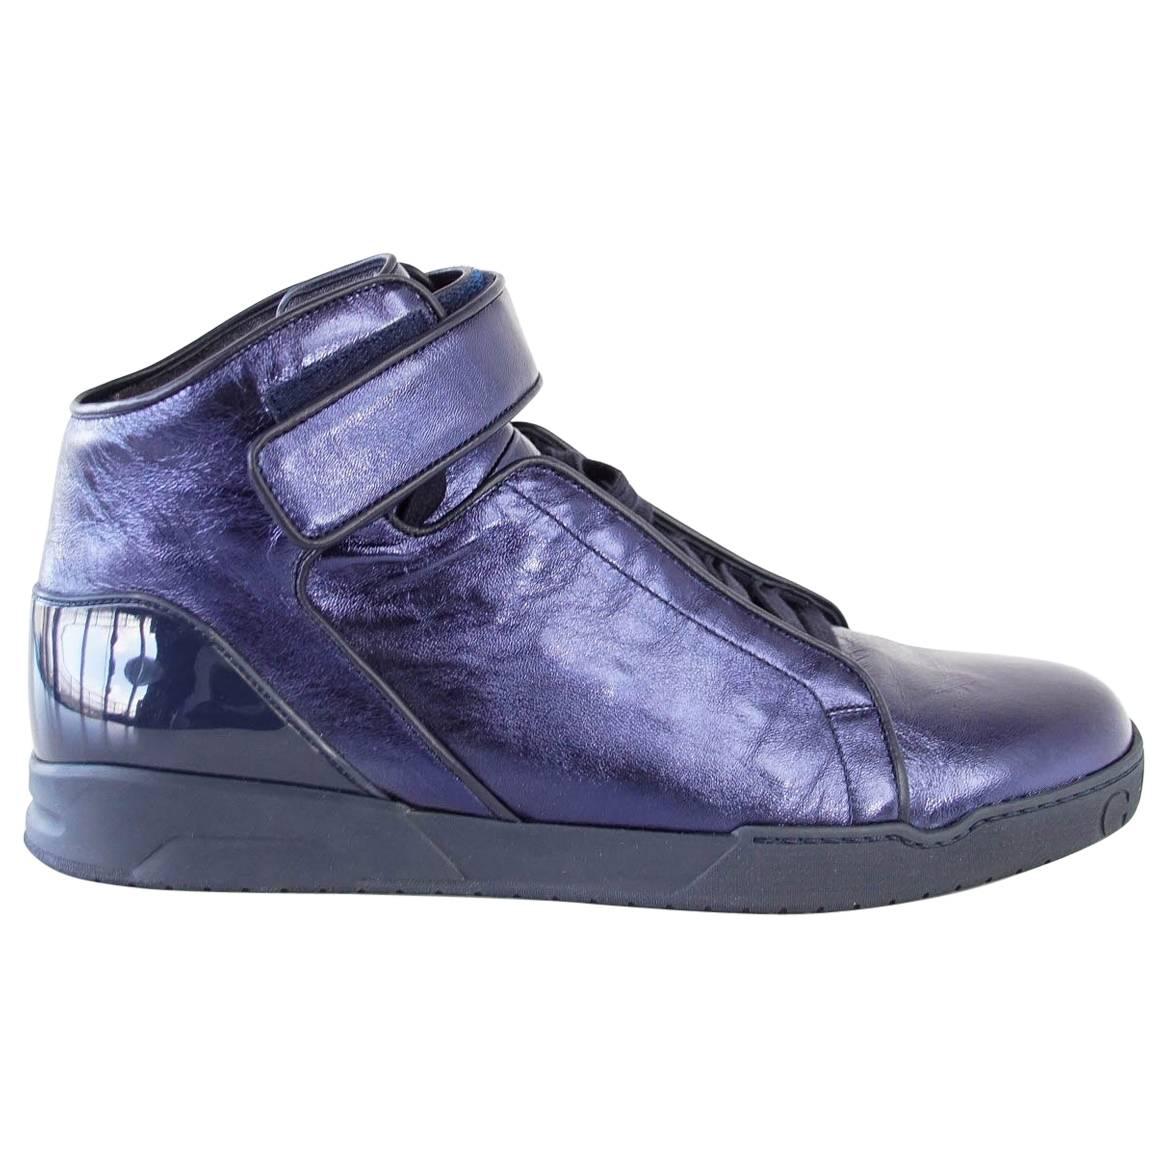  Gucci Shoe Men's Midnight Blue Nappa Silk Leather High Top Sneaker  9.5 new For Sale